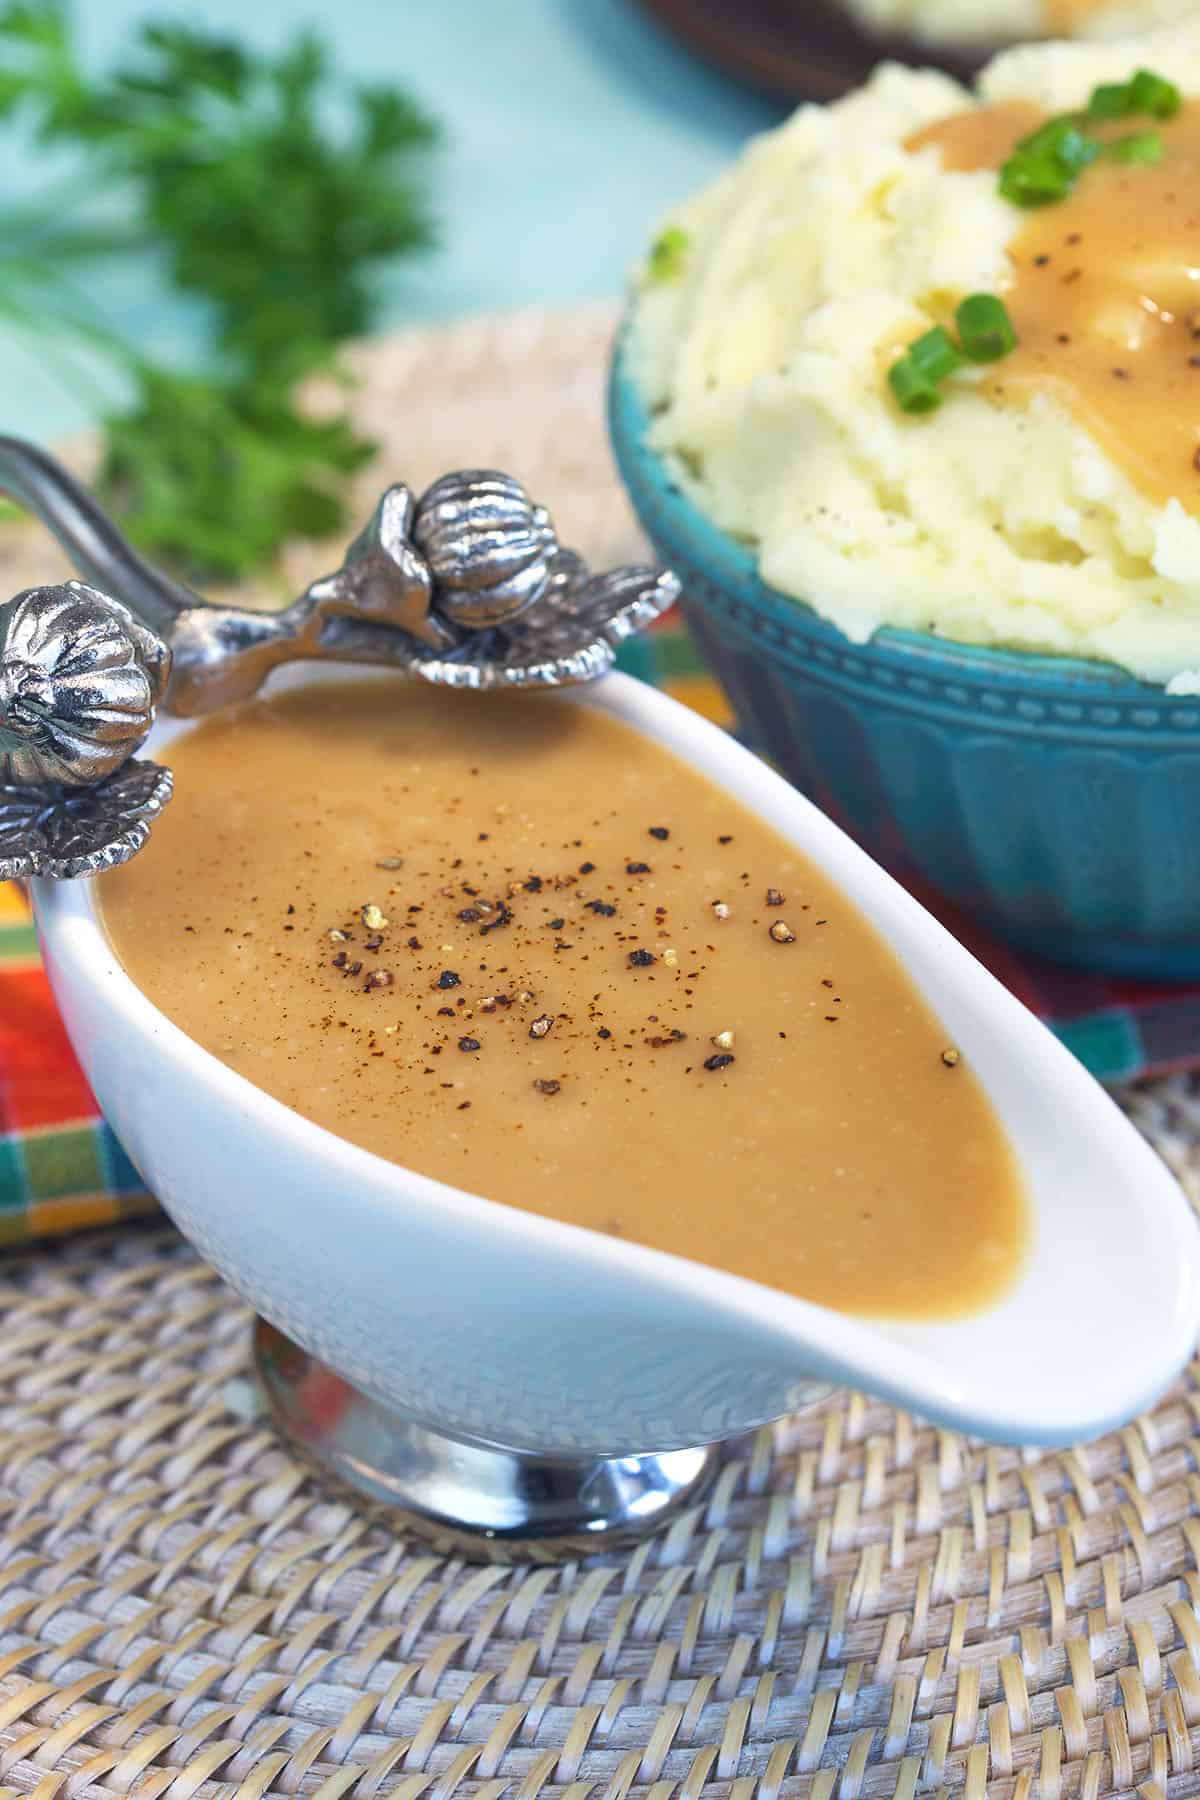 Brown gravy is topped with coarsley ground black pepper.